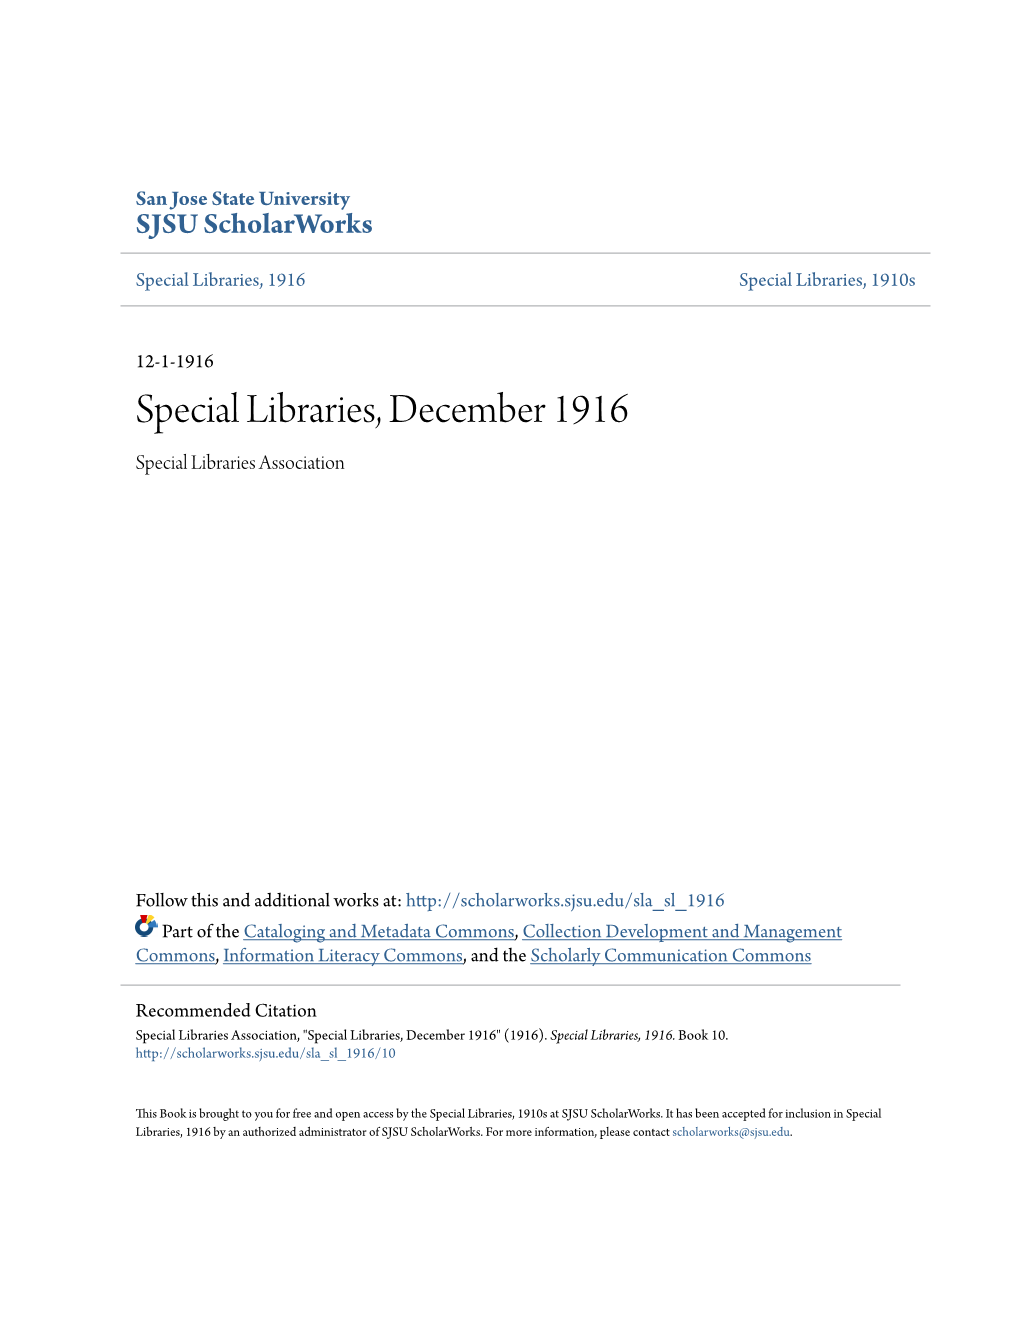 Special Libraries, December 1916 Special Libraries Association